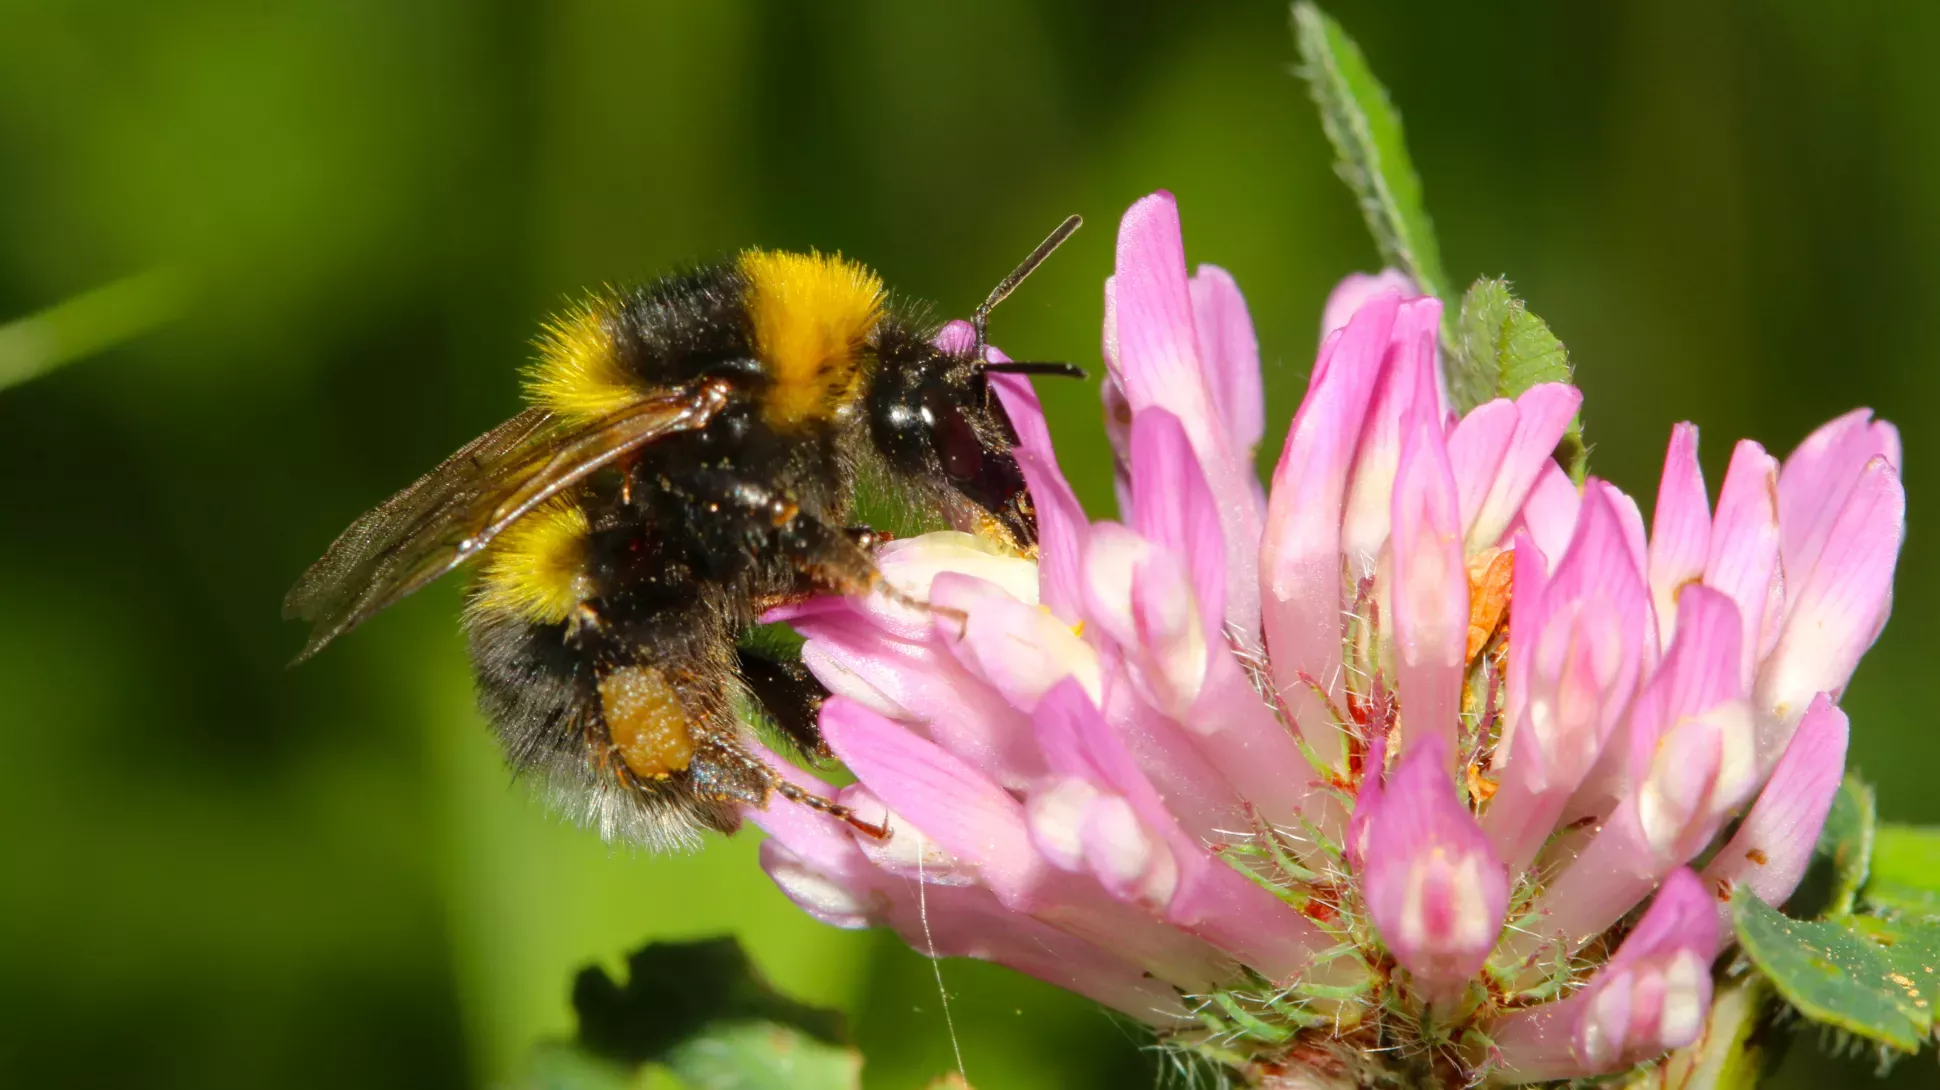 A black and yellow bumblebee feeding on a pink white flower